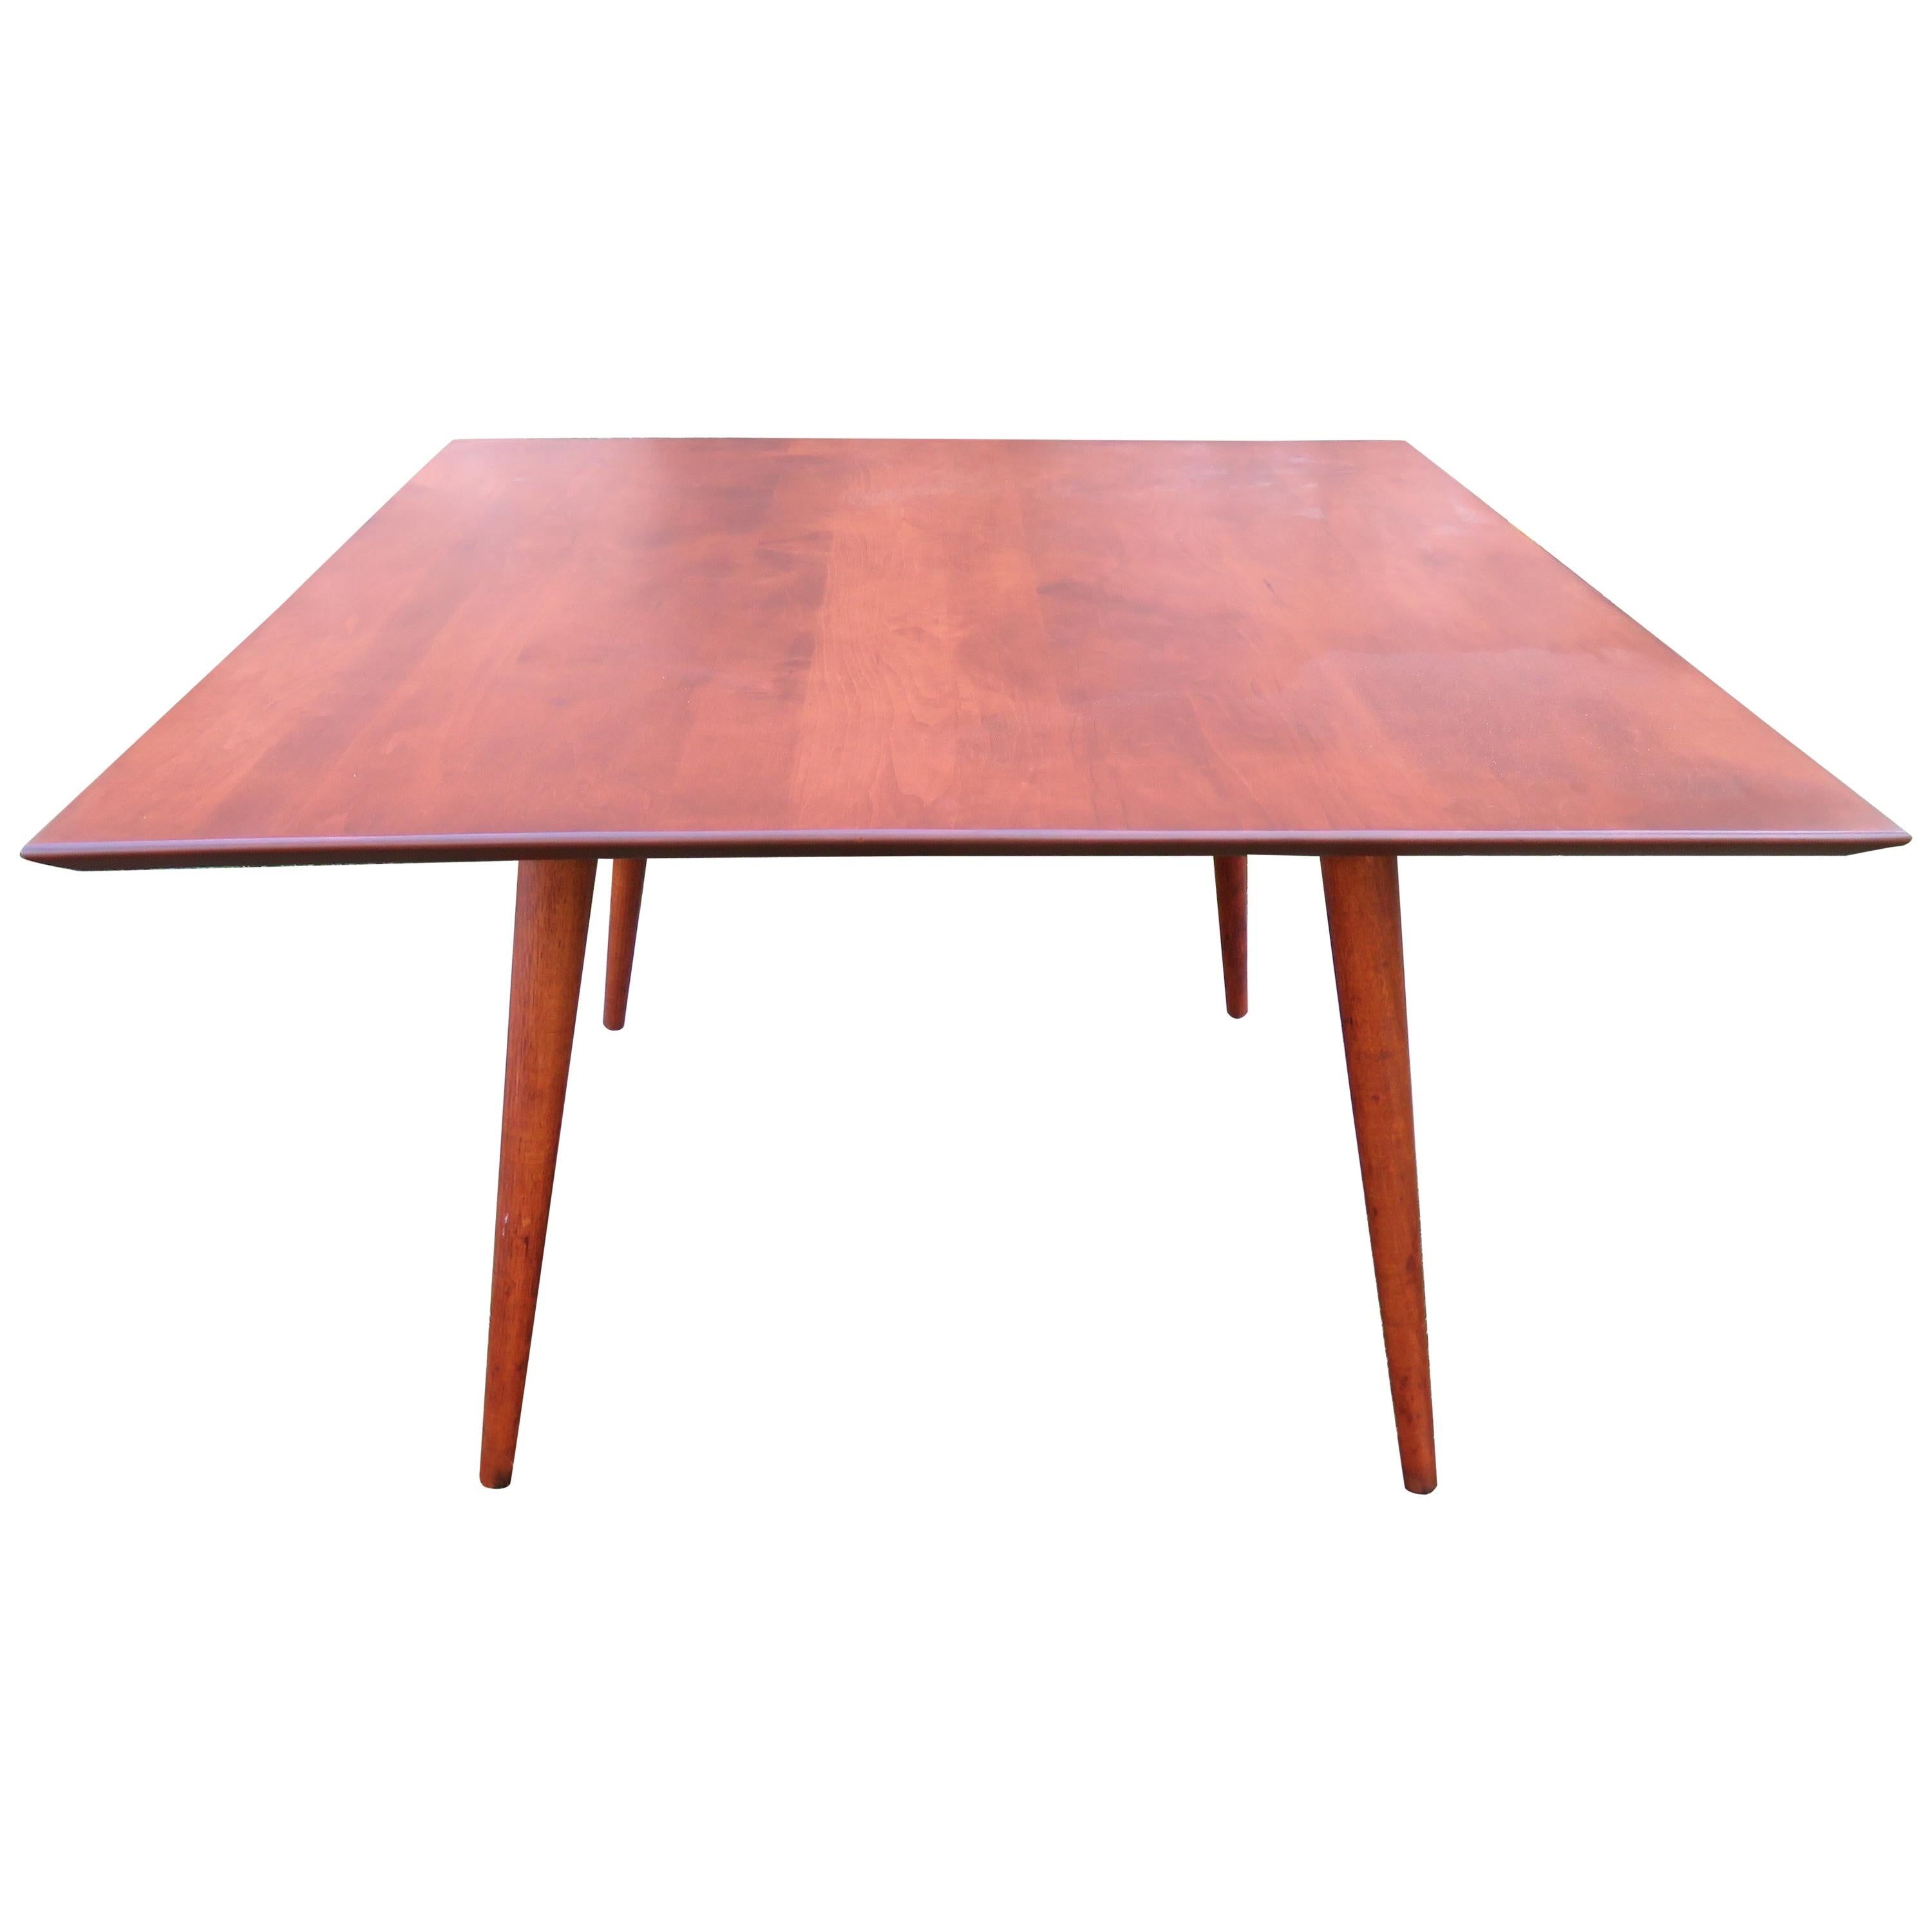 Fantastic Paul McCobb for Planner Group Mid Century Square Coffee Table For Sale